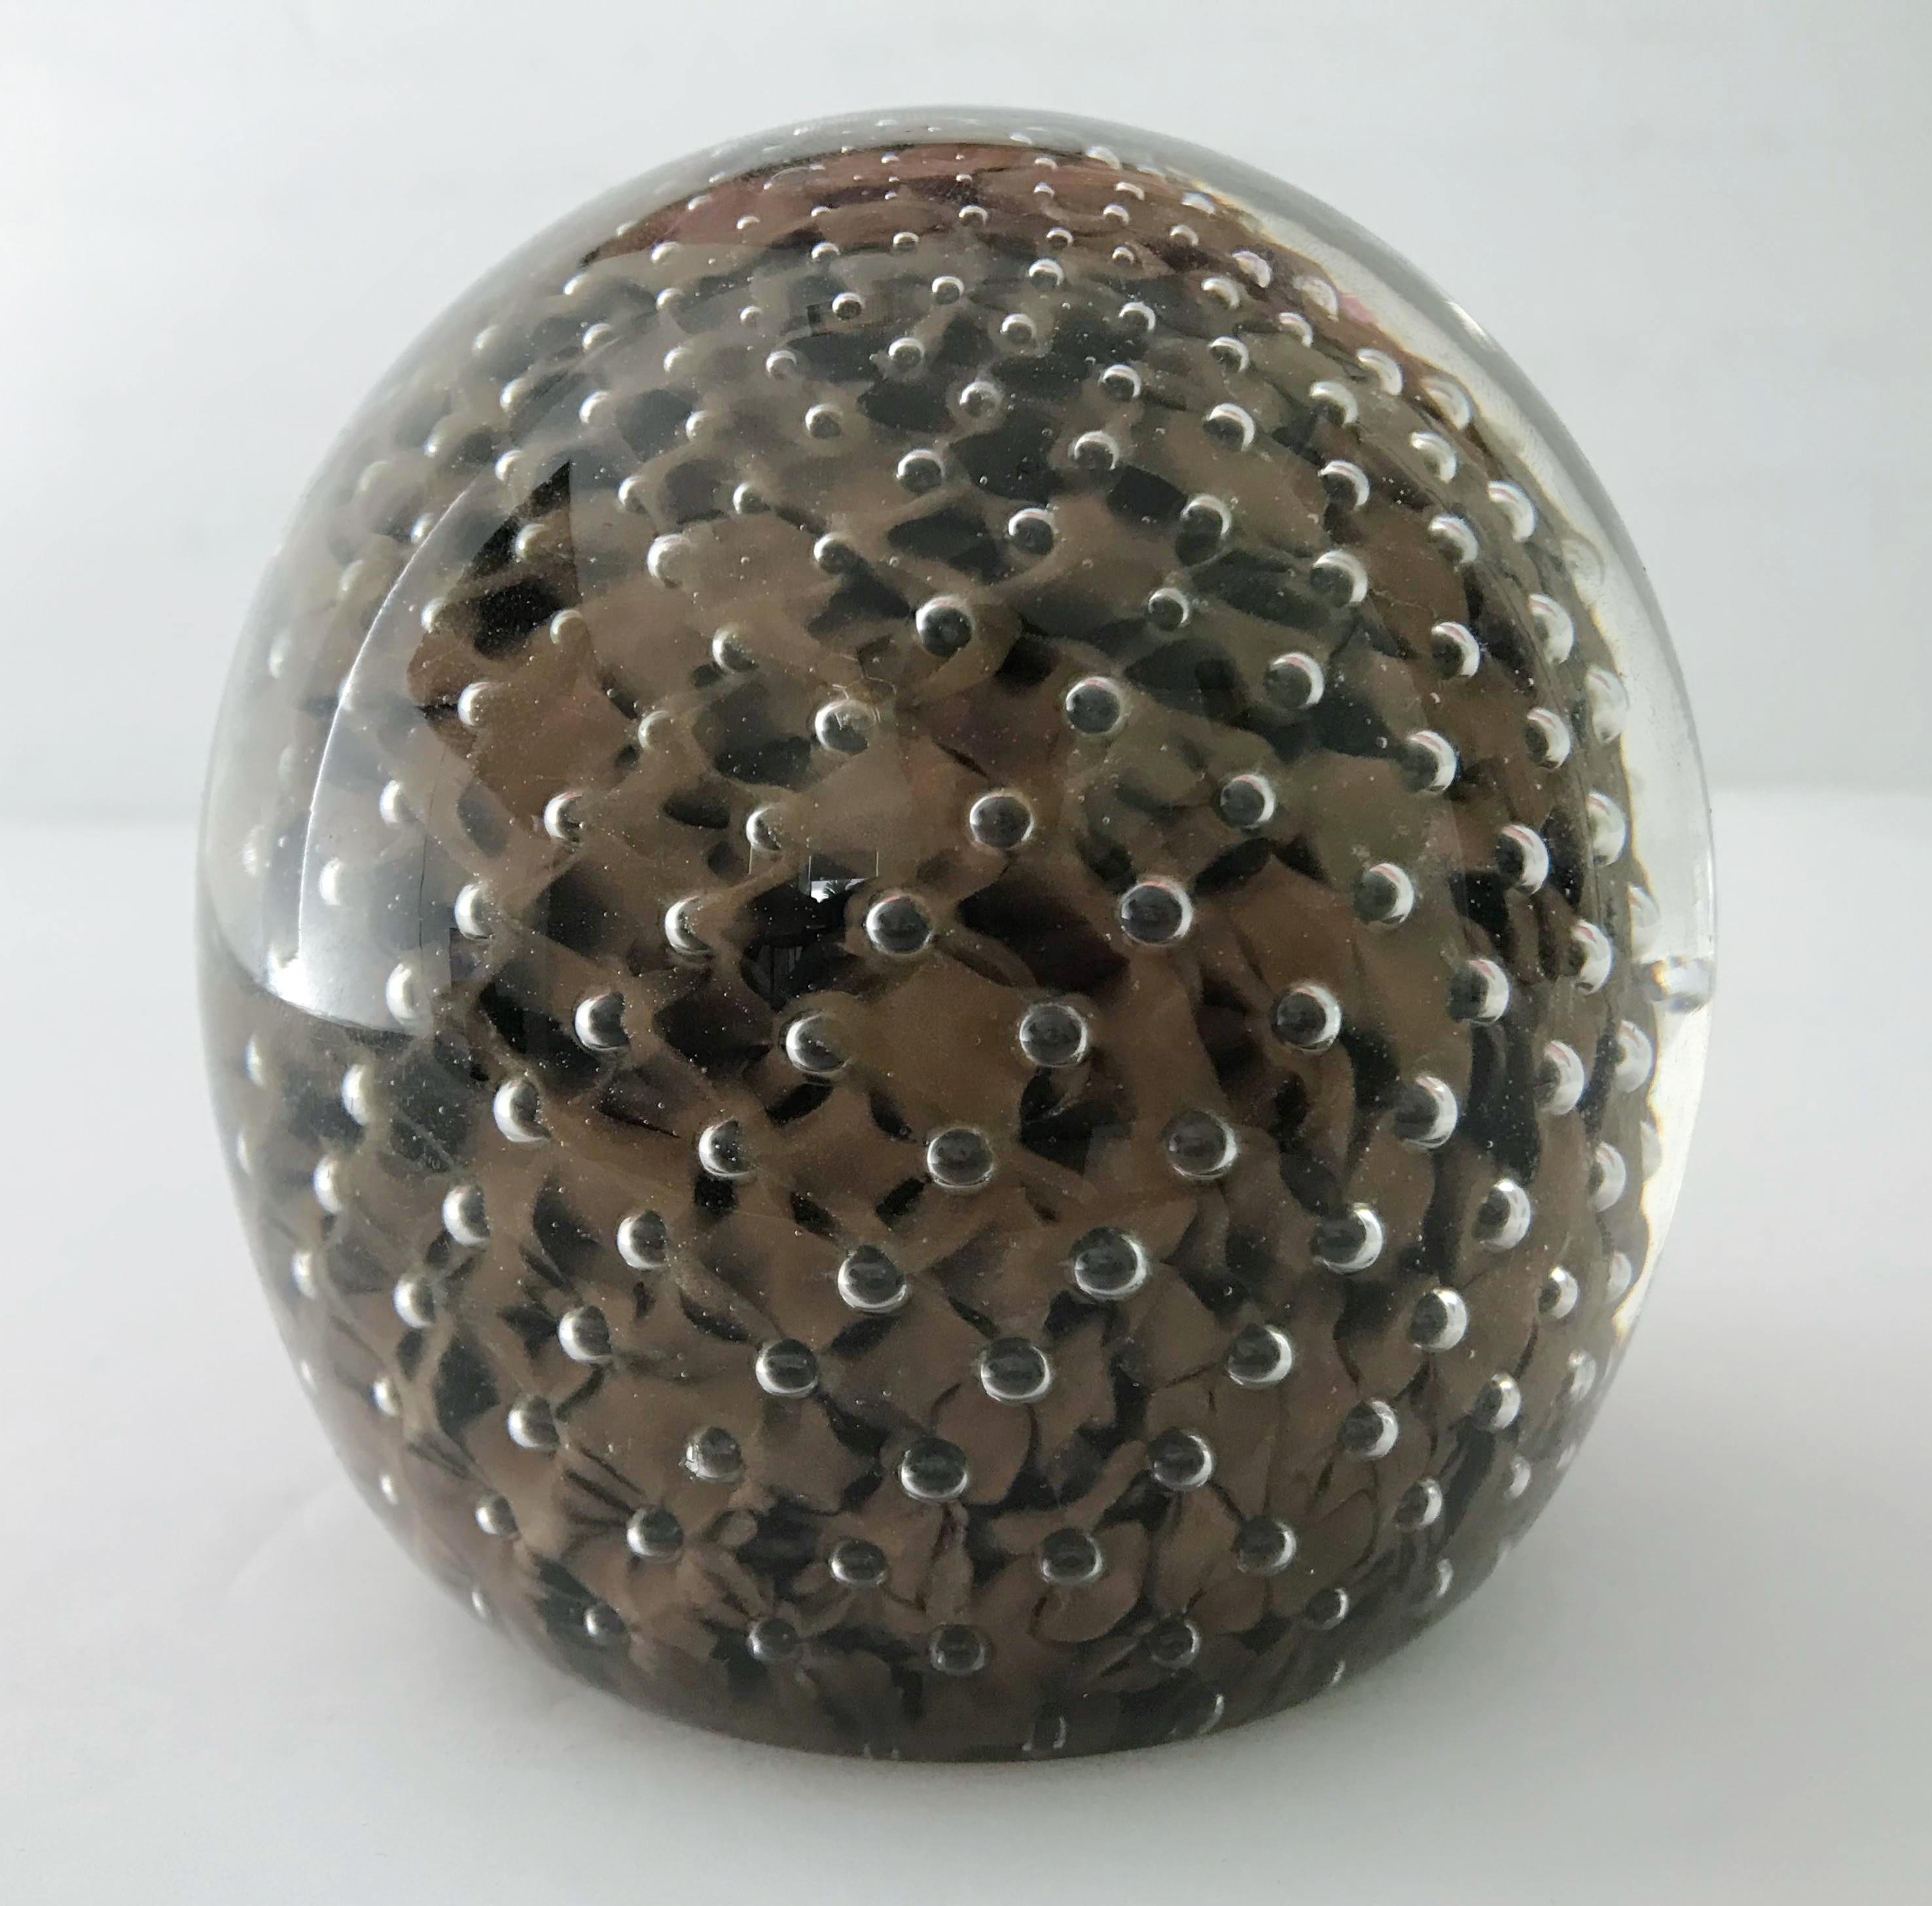 Vintage Italian smoky brown paperweight hand blown with avventurina and bollicine technique / Made in Italy circa 1960s
Measures: Diameter 4 inches
1 in stock in Palm Springs on FINAL CLEARANCE SALE for $299 !!
* Please note the minor imperfections